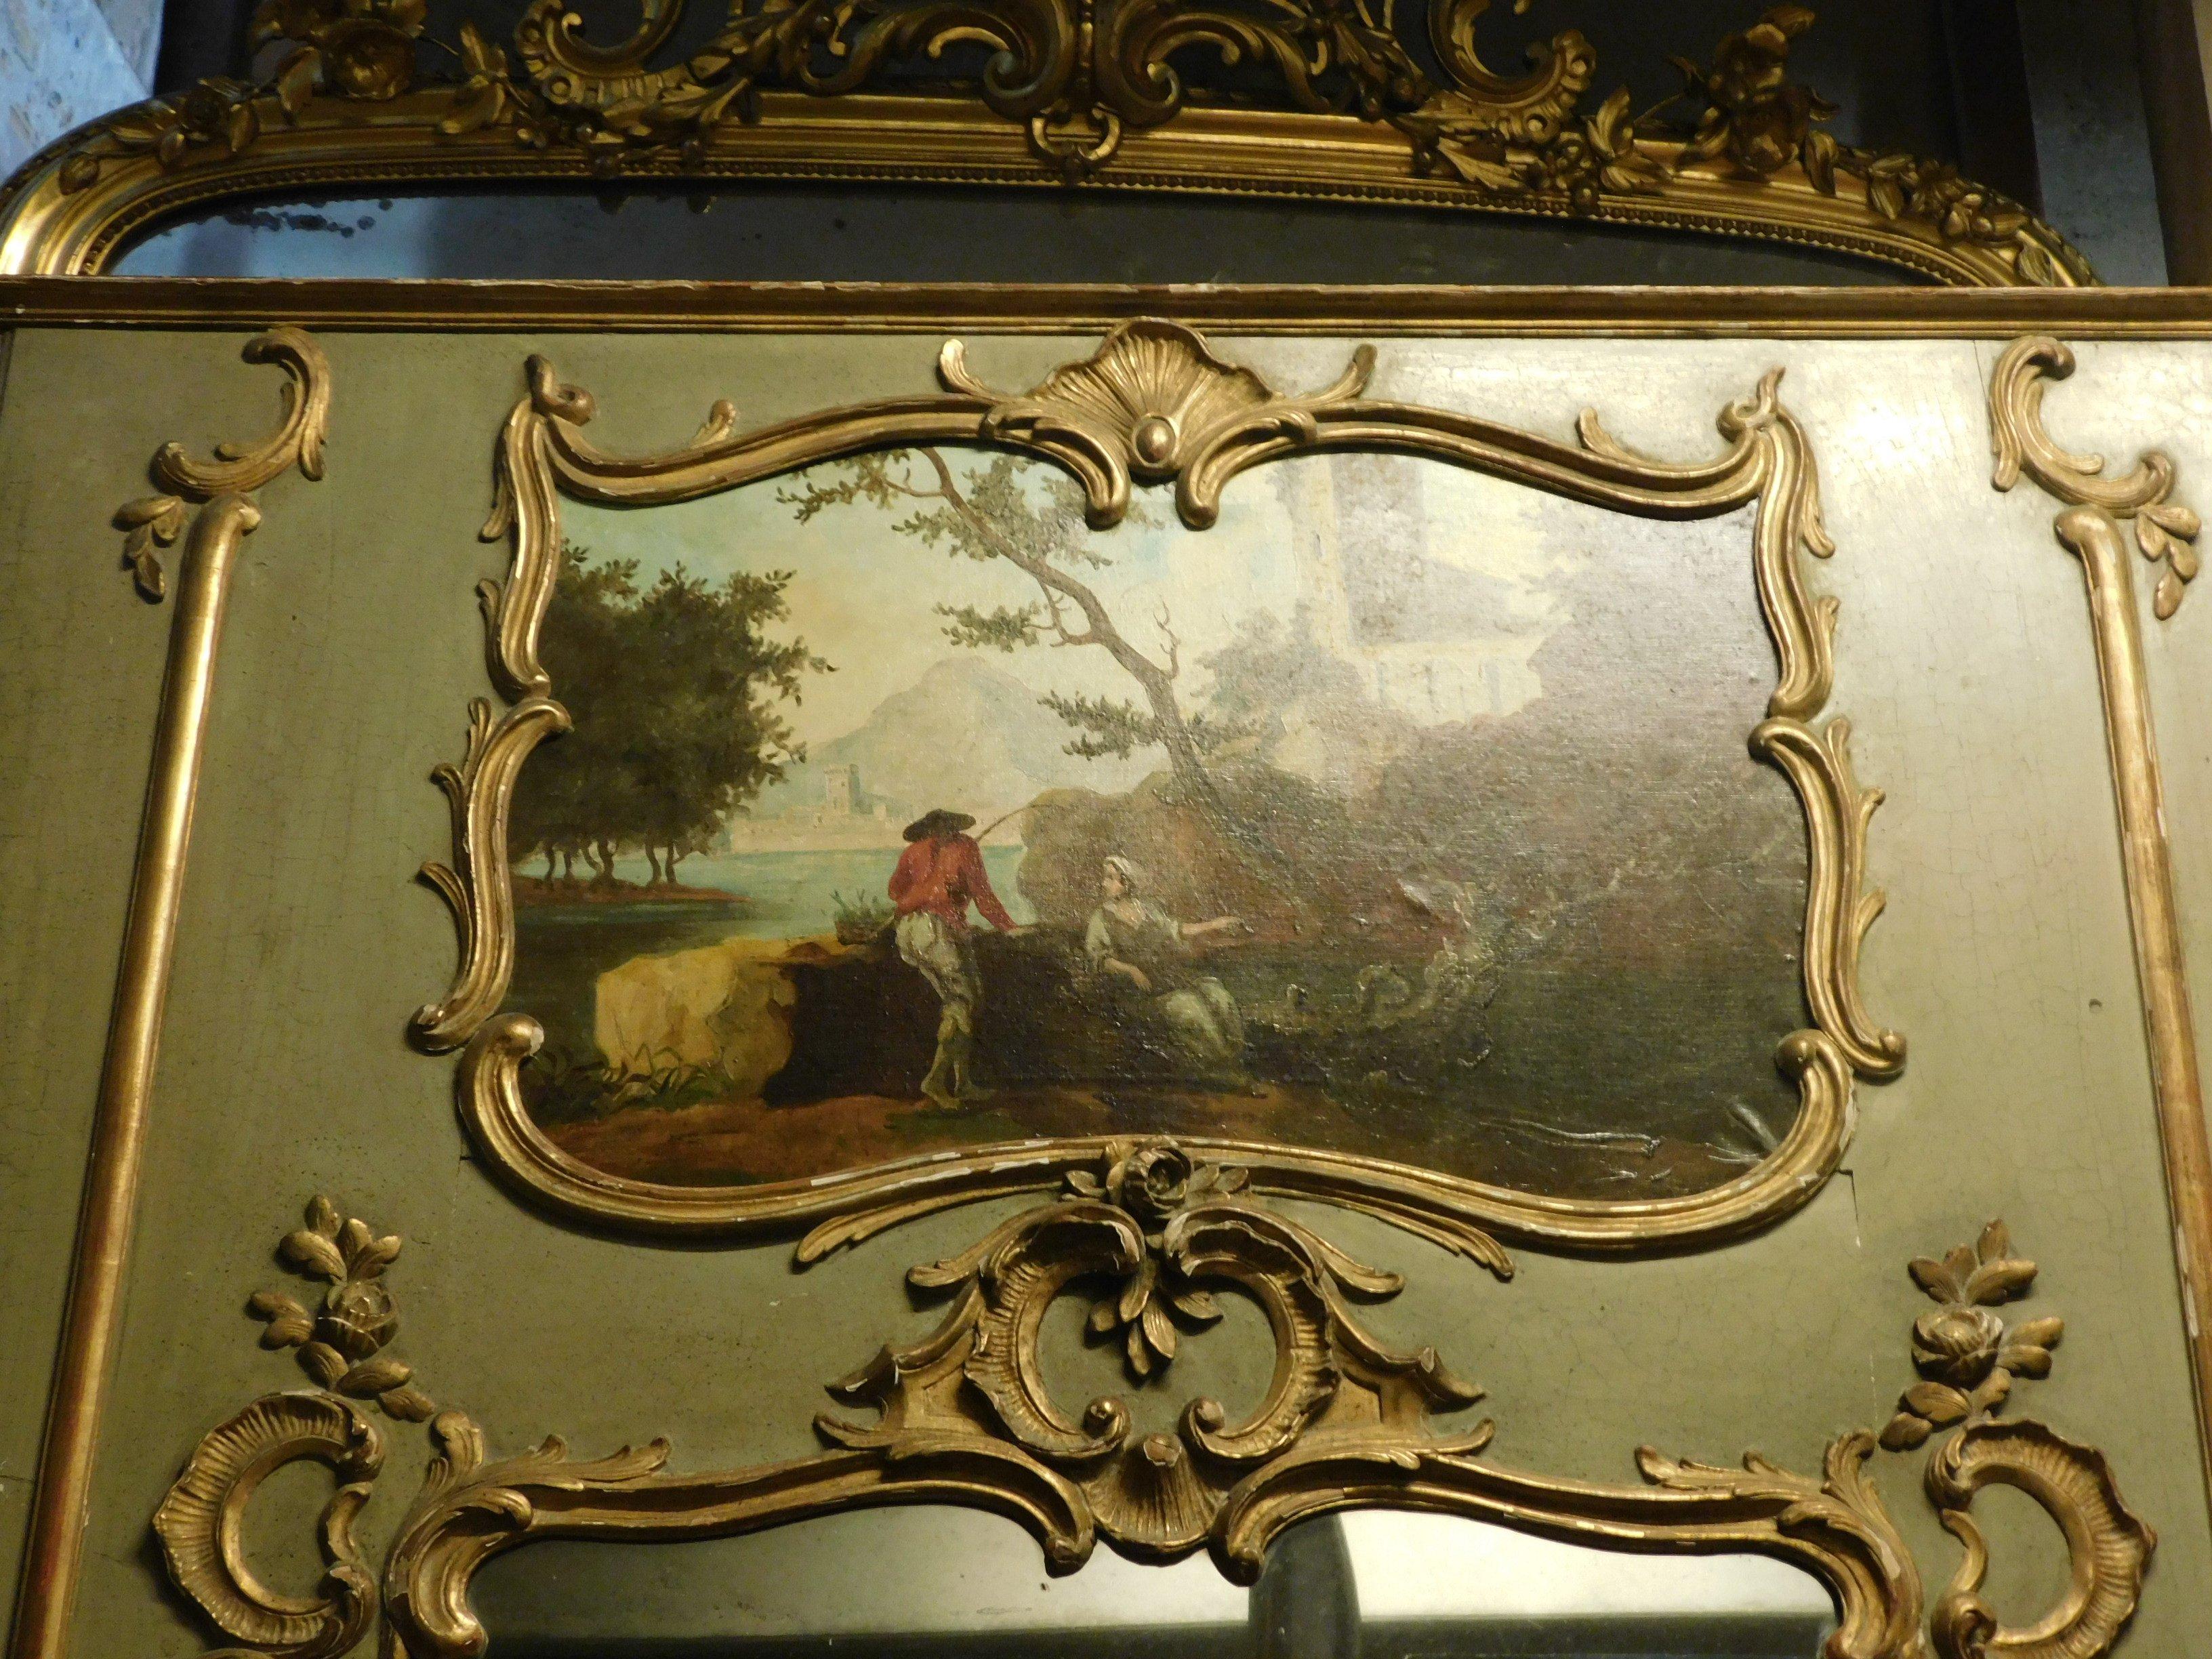 Hand-Painted Antique Louis XVI Mirror, green and gold with painting, 18th century France